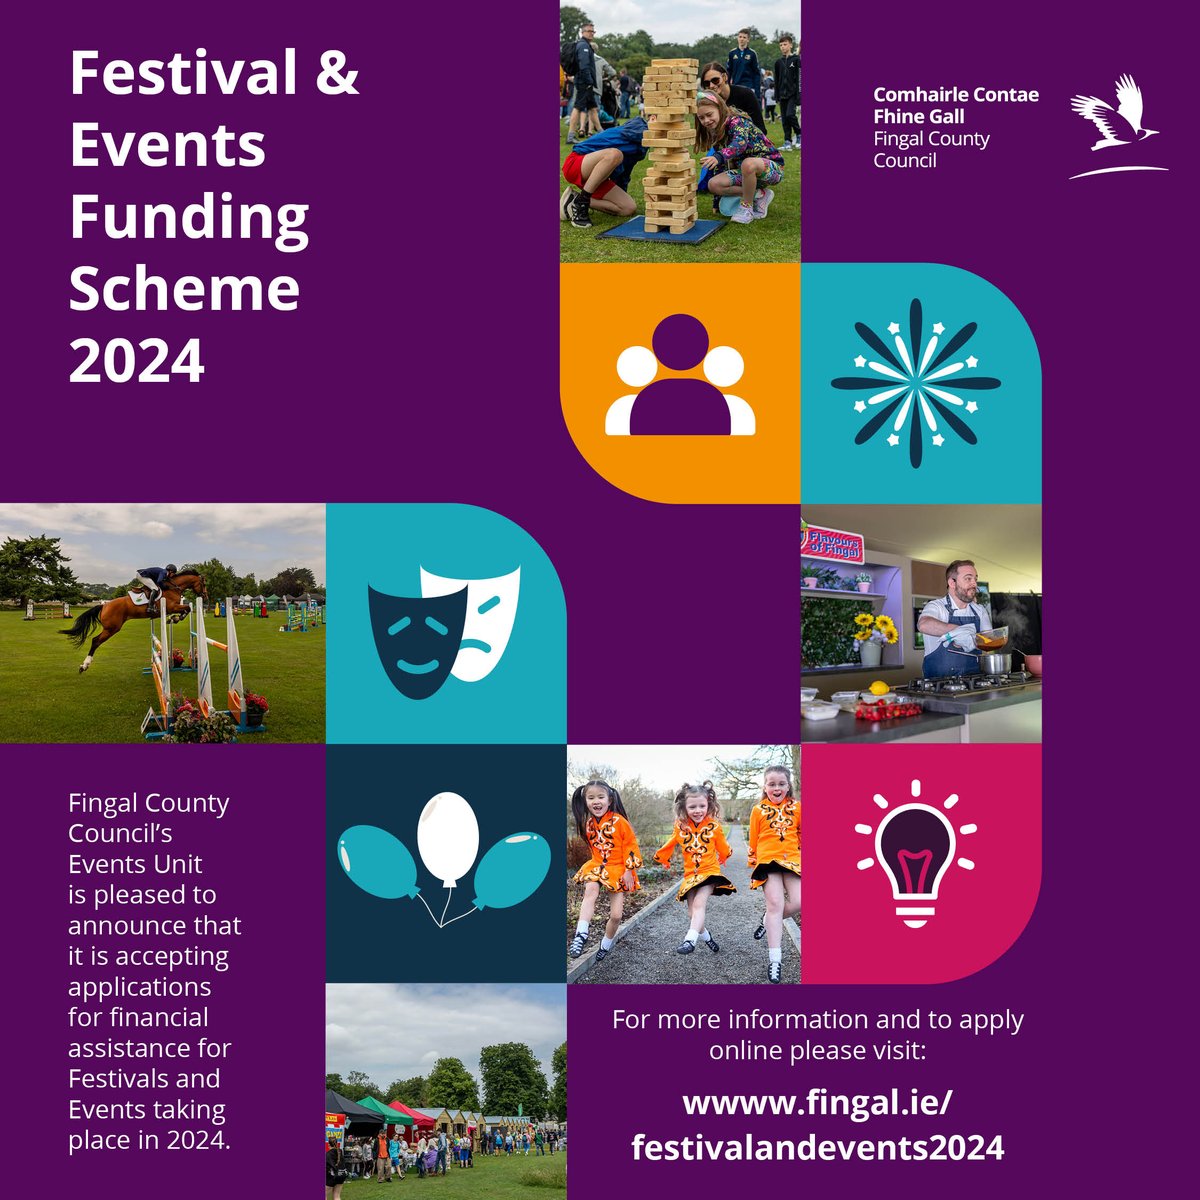 Exciting news! 📢 Fingal County Council Festival & Event Funding Scheme 2024 is OPEN! Calling all event organisers, share your vision for amazing local experiences. Apply by Janaury 31, 2024, 12pm. For info & apply: fingal.ie/festivalandeve… Let's make 2024 unforgettable in Fingal